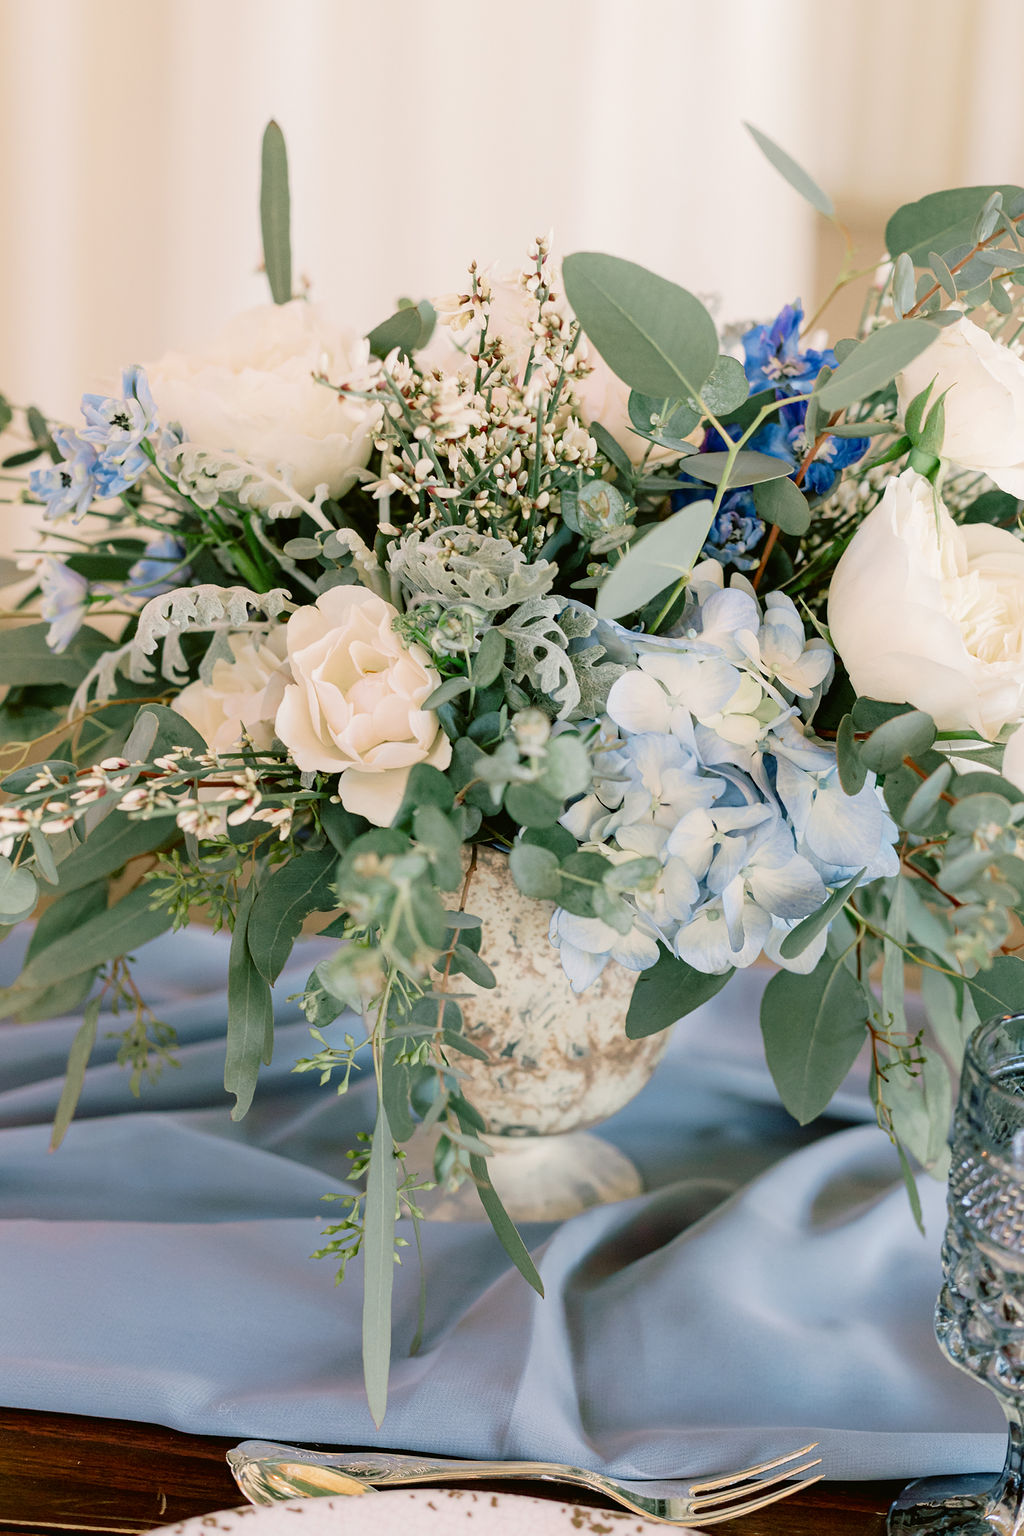 White and light blue wedding flowers center piece on a draped light blue table runner